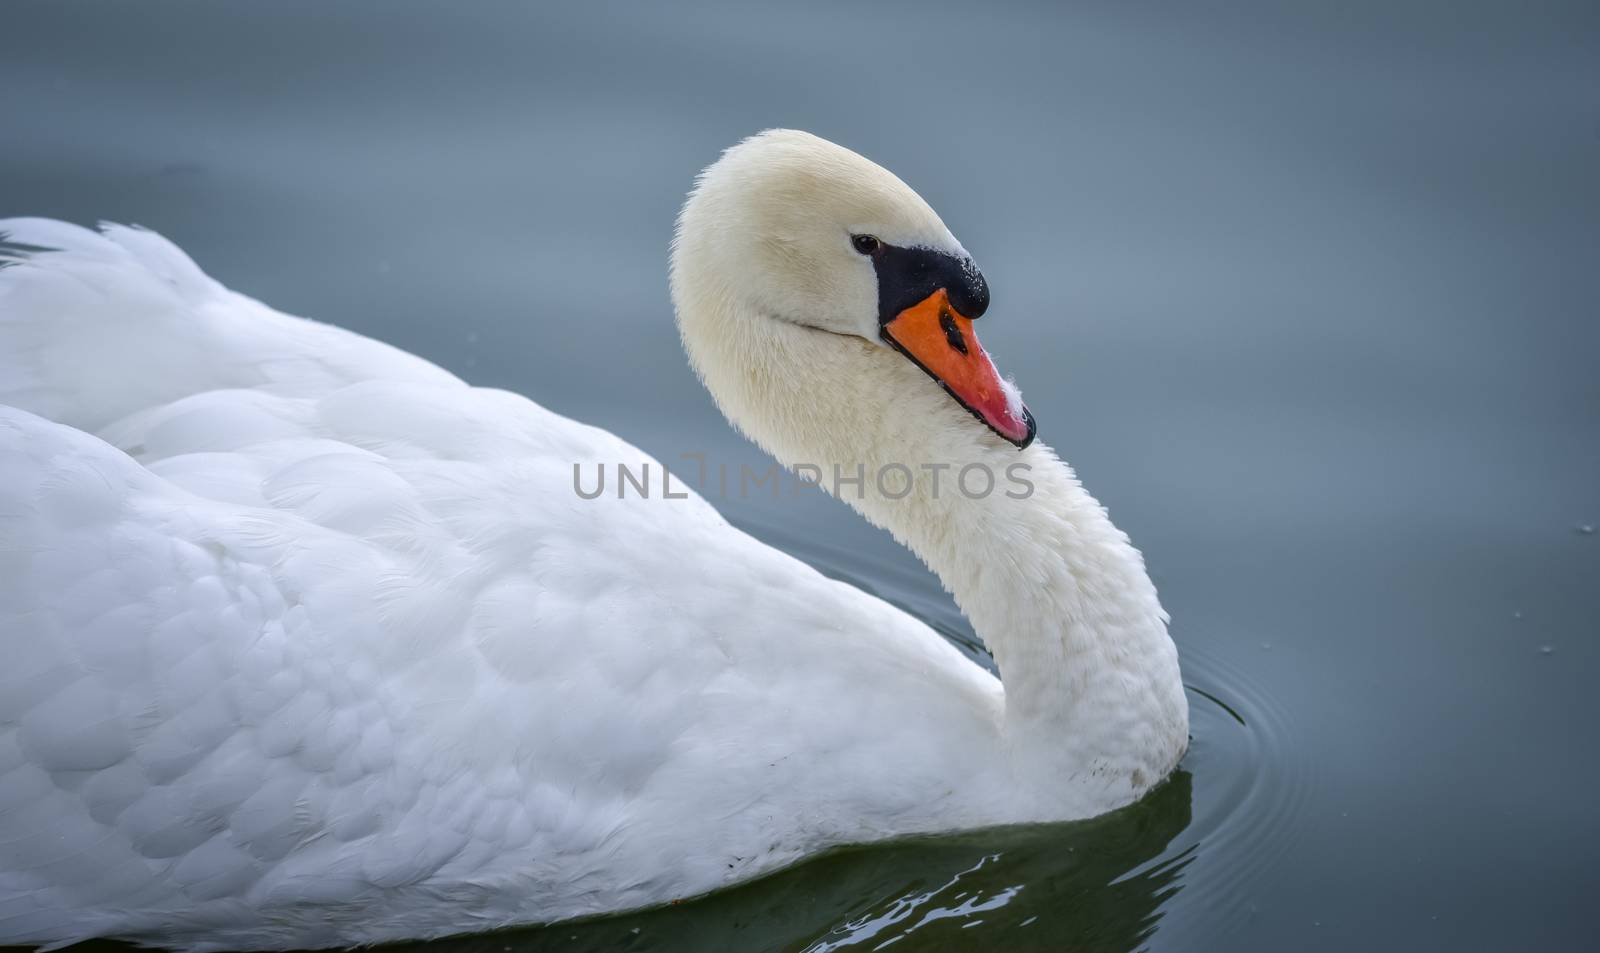 A lone white swan swims about his pond getting close to the camera in his friendly curiosity.